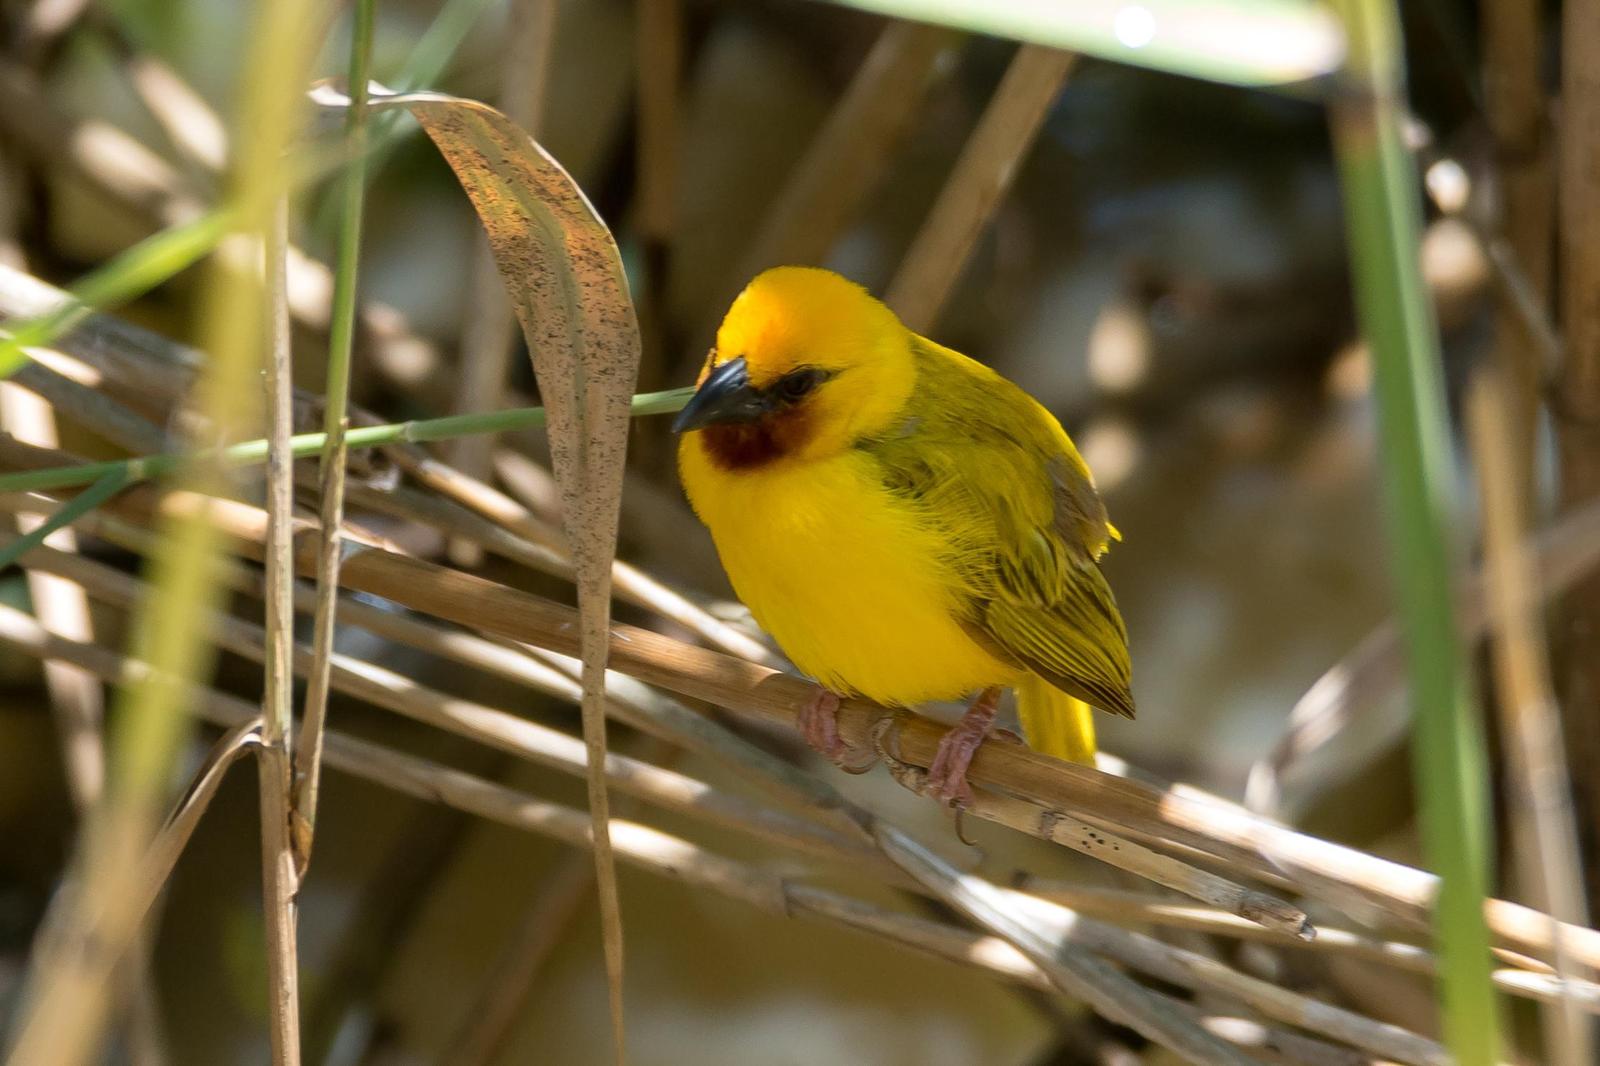 Southern Brown-throated Weaver Photo by Gerald Hoekstra